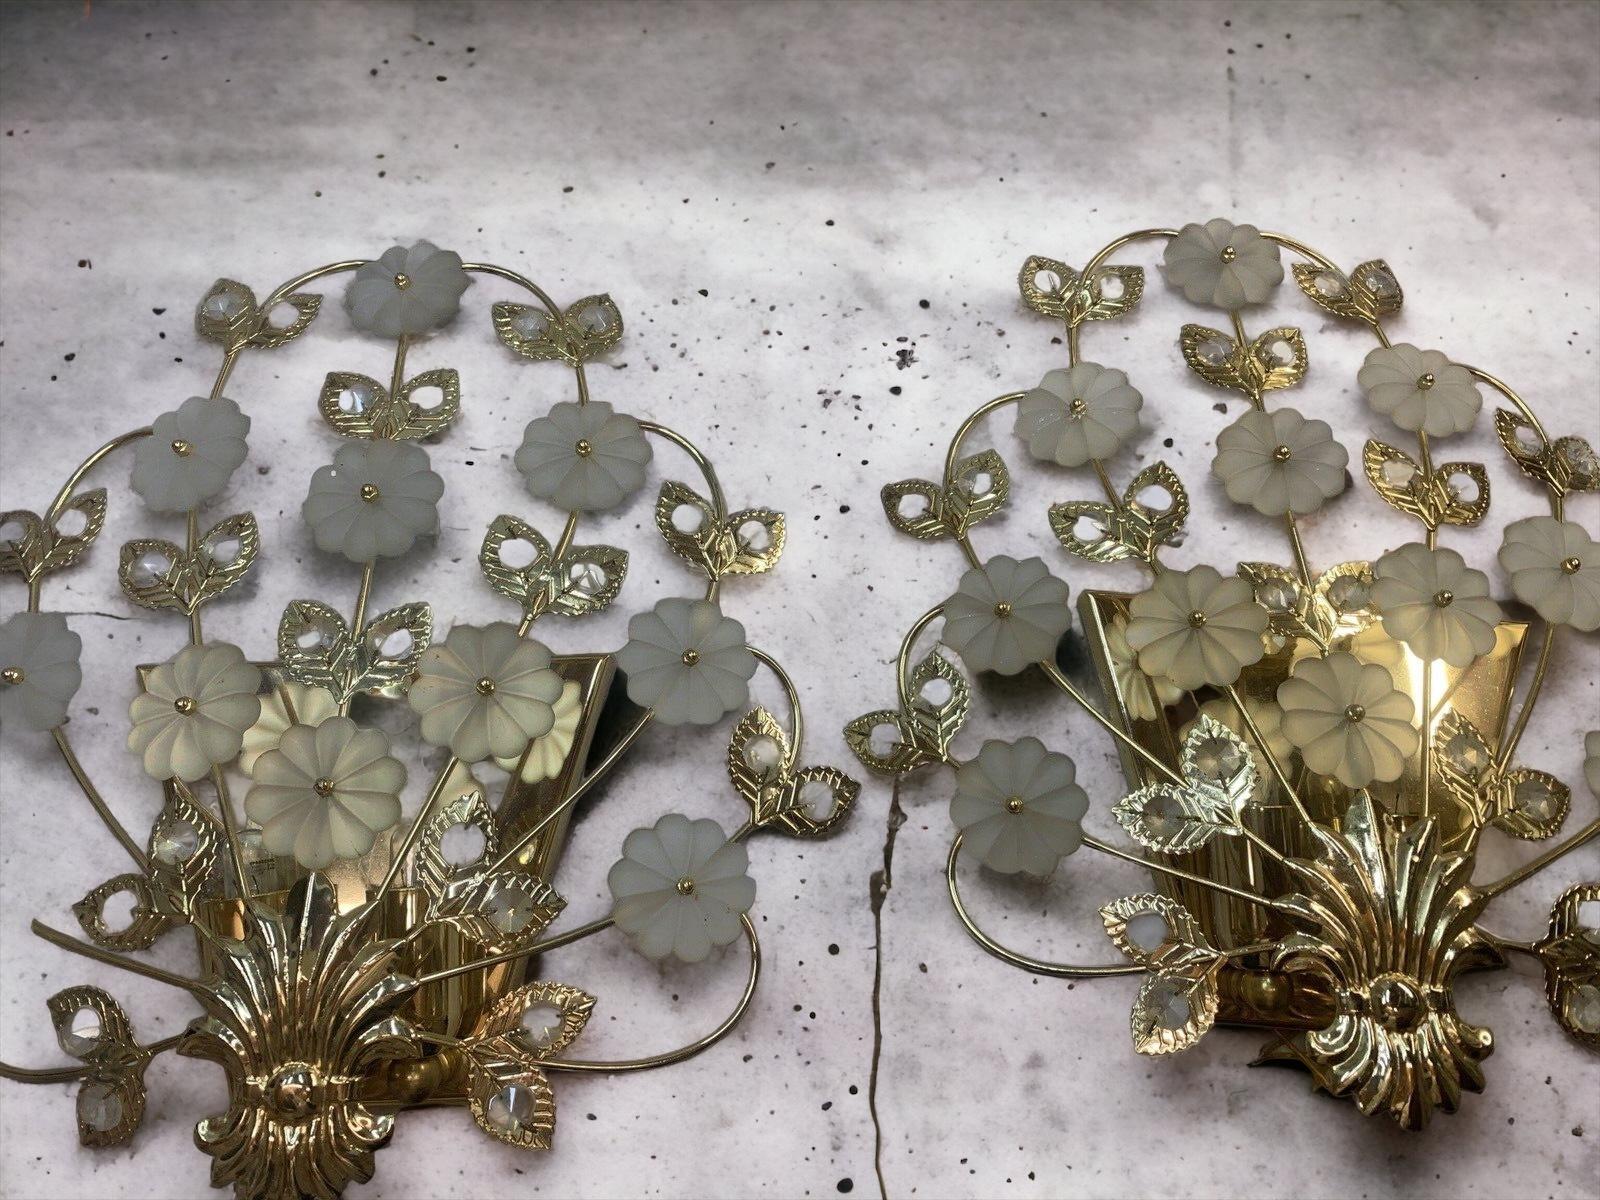 Pair of vintage two light sconces with faceted crystals and glass flowers made by the German company Palwa. Each fixture has two European style E14 sockets. Each requires two European E14 candelabra bulbs, up to 40 Watts each. A nice addition to any